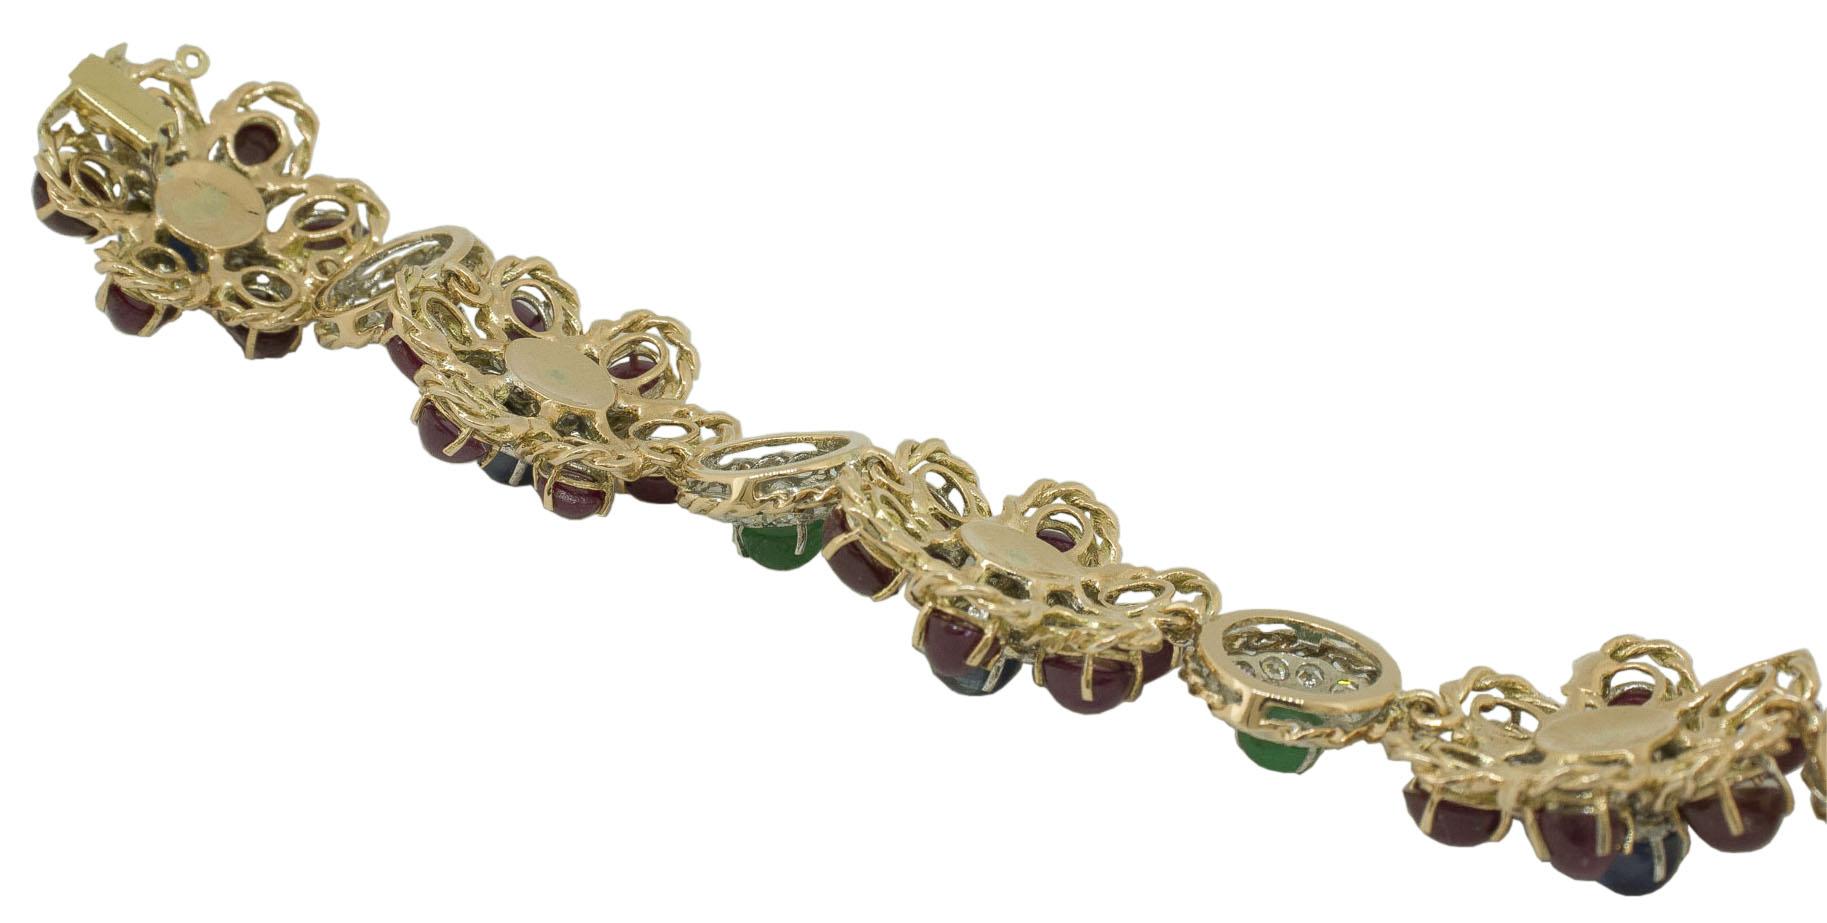 Brilliant Cut White Diamonds Rubies Emeralds Blue Sapphires Rose and White Gold Link Bracelet For Sale